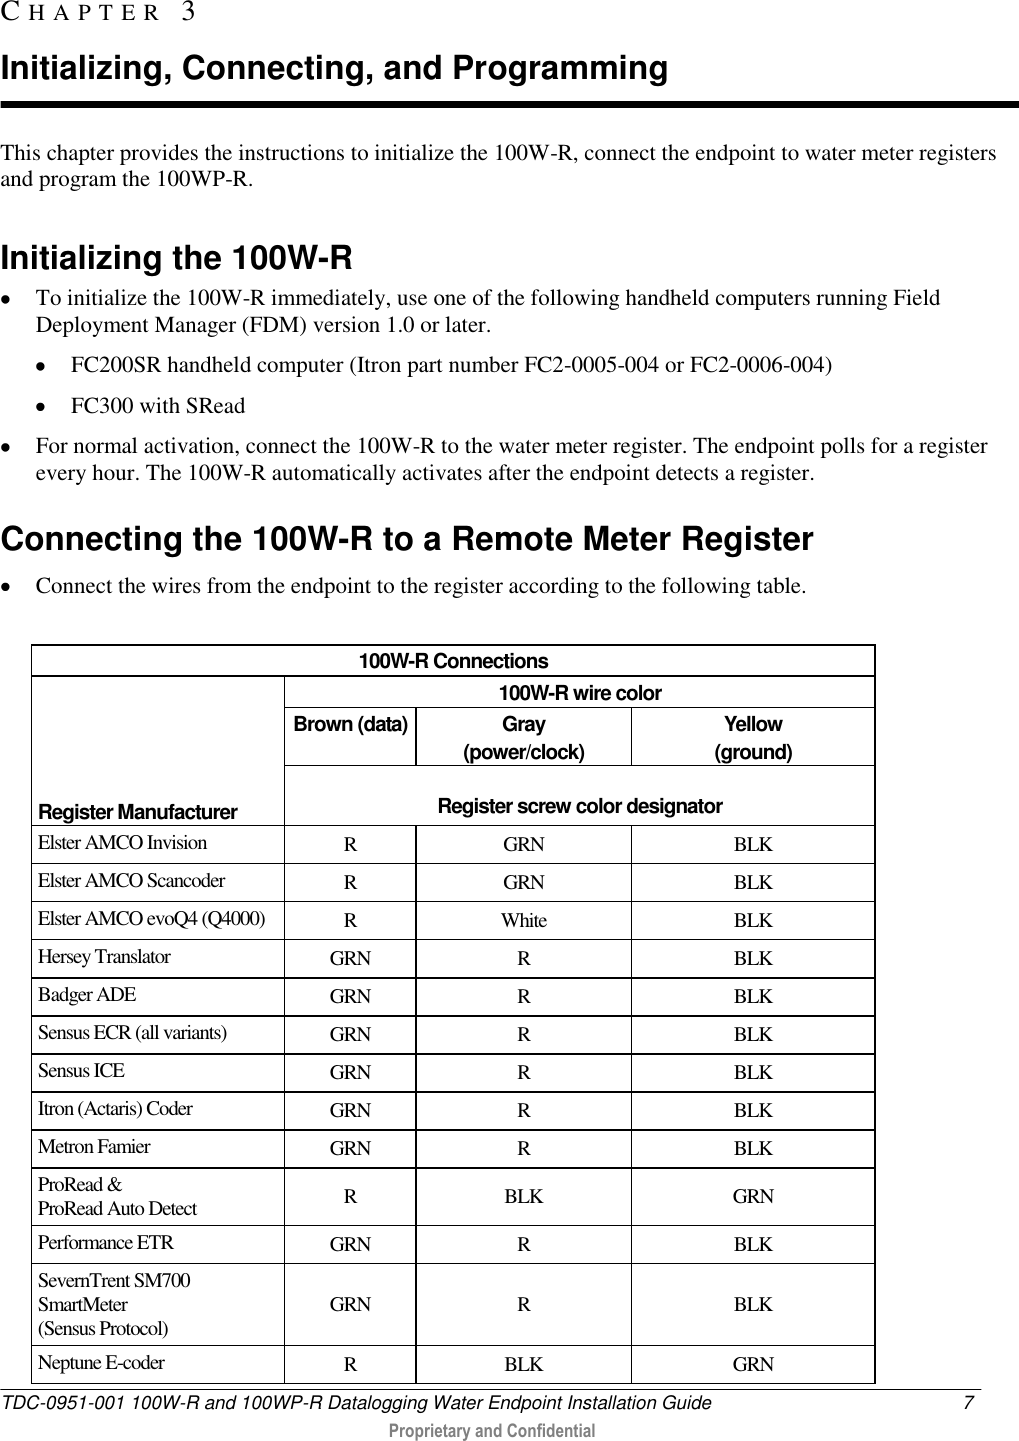  TDC-0951-001 100W-R and 100WP-R Datalogging Water Endpoint Installation Guide  7   Proprietary and Confidential     This chapter provides the instructions to initialize the 100W-R, connect the endpoint to water meter registers and program the 100WP-R.   Initializing the 100W-R  To initialize the 100W-R immediately, use one of the following handheld computers running Field Deployment Manager (FDM) version 1.0 or later.   FC200SR handheld computer (Itron part number FC2-0005-004 or FC2-0006-004)  FC300 with SRead  For normal activation, connect the 100W-R to the water meter register. The endpoint polls for a register every hour. The 100W-R automatically activates after the endpoint detects a register.   Connecting the 100W-R to a Remote Meter Register    Connect the wires from the endpoint to the register according to the following table.  100W-R Connections      Register Manufacturer 100W-R wire color Brown (data) Gray  (power/clock) Yellow (ground)  Register screw color designator Elster AMCO Invision R GRN BLK Elster AMCO Scancoder R GRN BLK Elster AMCO evoQ4 (Q4000) R White BLK Hersey Translator GRN R BLK Badger ADE GRN R BLK Sensus ECR (all variants) GRN R BLK Sensus ICE GRN R BLK Itron (Actaris) Coder GRN R BLK Metron Famier GRN R BLK ProRead &amp;  ProRead Auto Detect R BLK GRN Performance ETR GRN R BLK SevernTrent SM700 SmartMeter  (Sensus Protocol) GRN R BLK Neptune E-coder R BLK GRN CH A P T E R   3  Initializing, Connecting, and Programming 